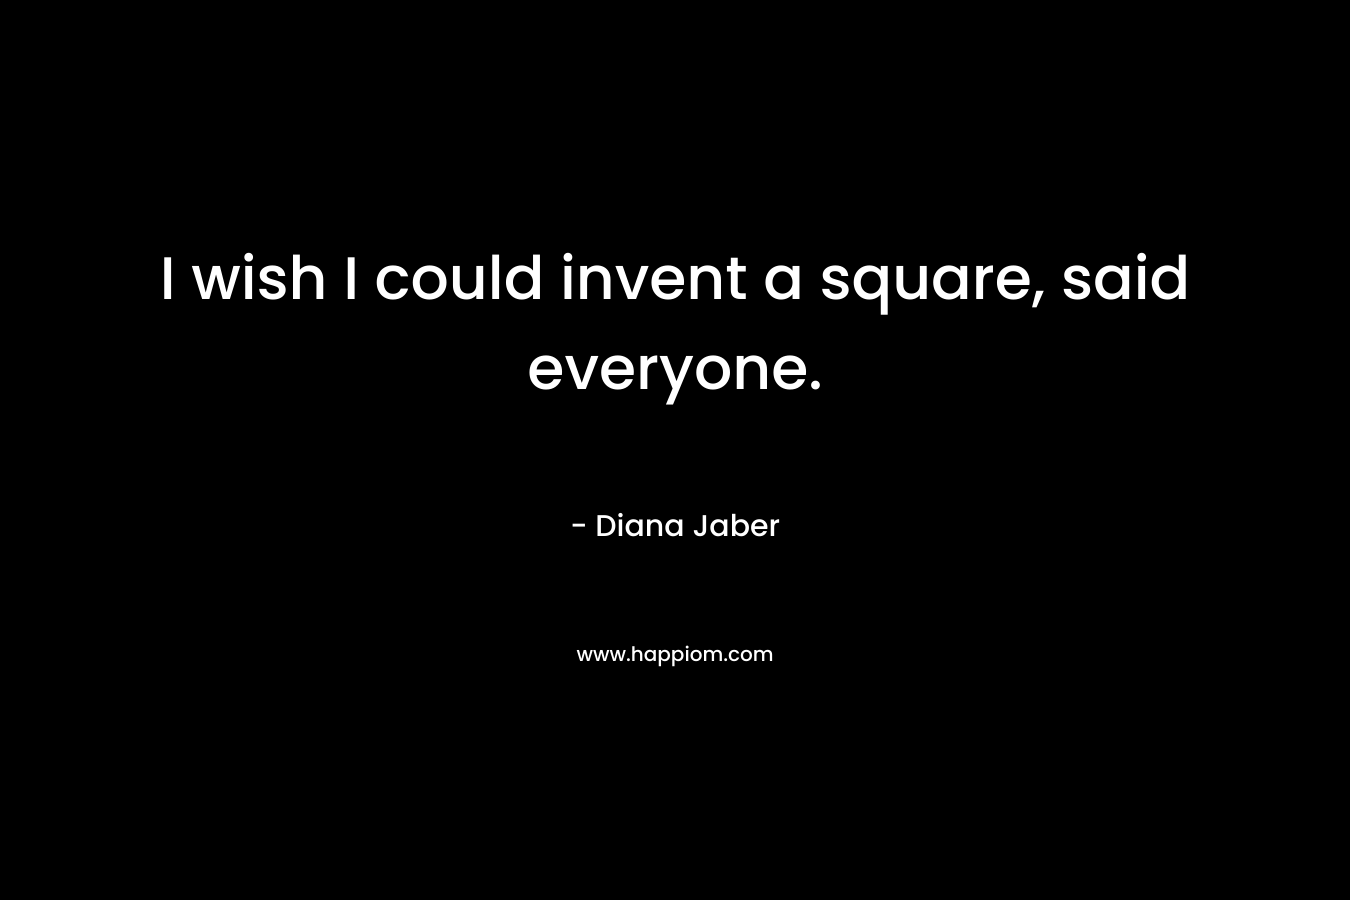 I wish I could invent a square, said everyone. – Diana Jaber